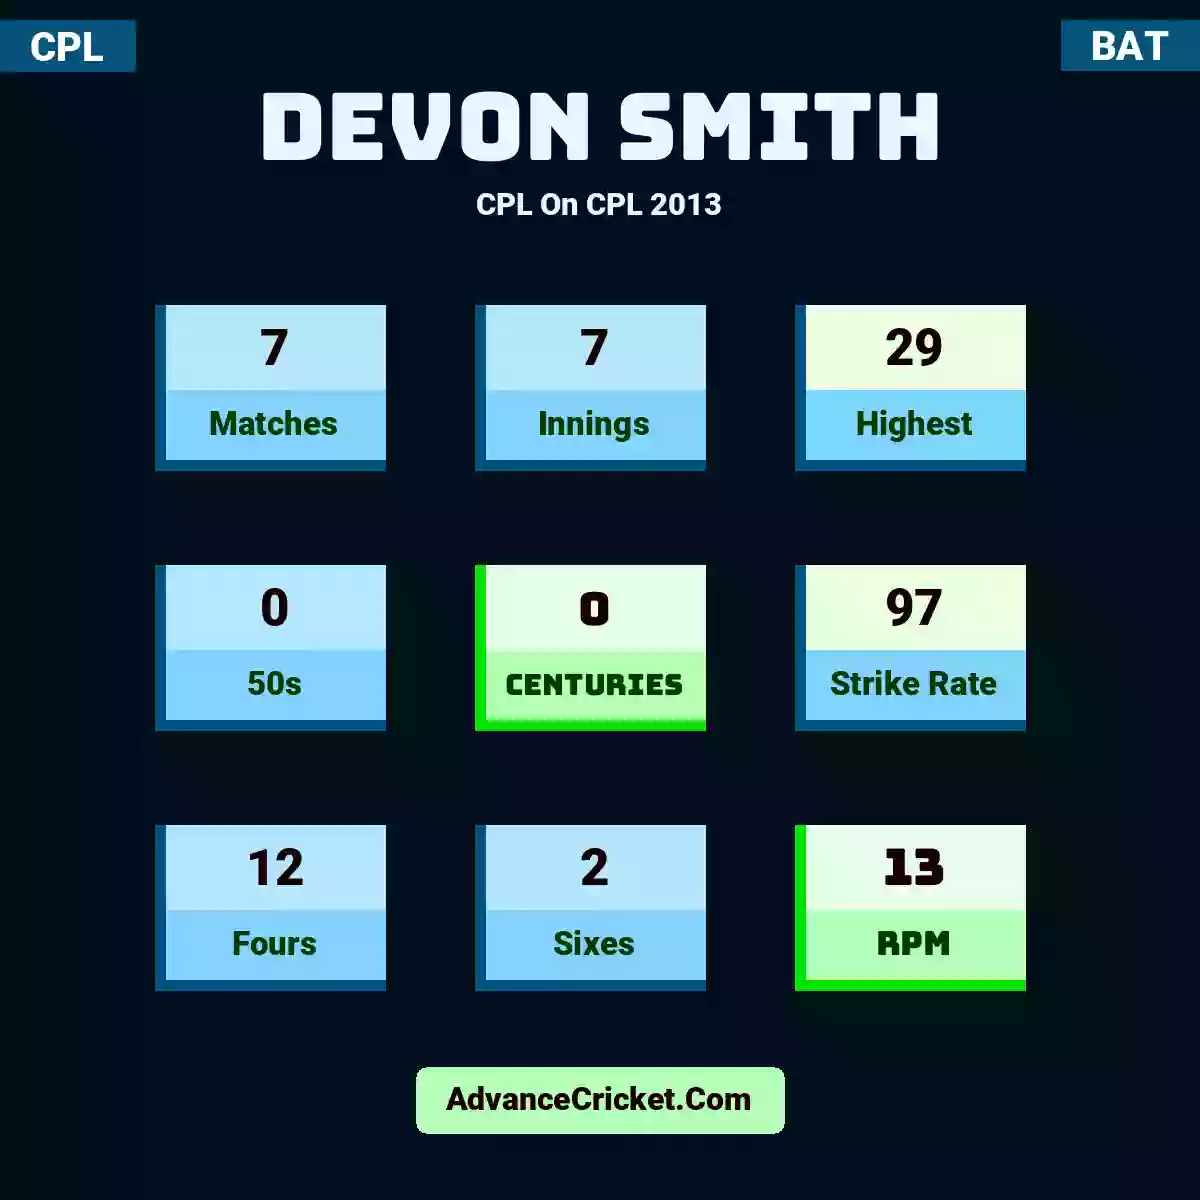 Devon Smith CPL  On CPL 2013, Devon Smith played 7 matches, scored 29 runs as highest, 0 half-centuries, and 0 centuries, with a strike rate of 97. D.Smith hit 12 fours and 2 sixes, with an RPM of 13.